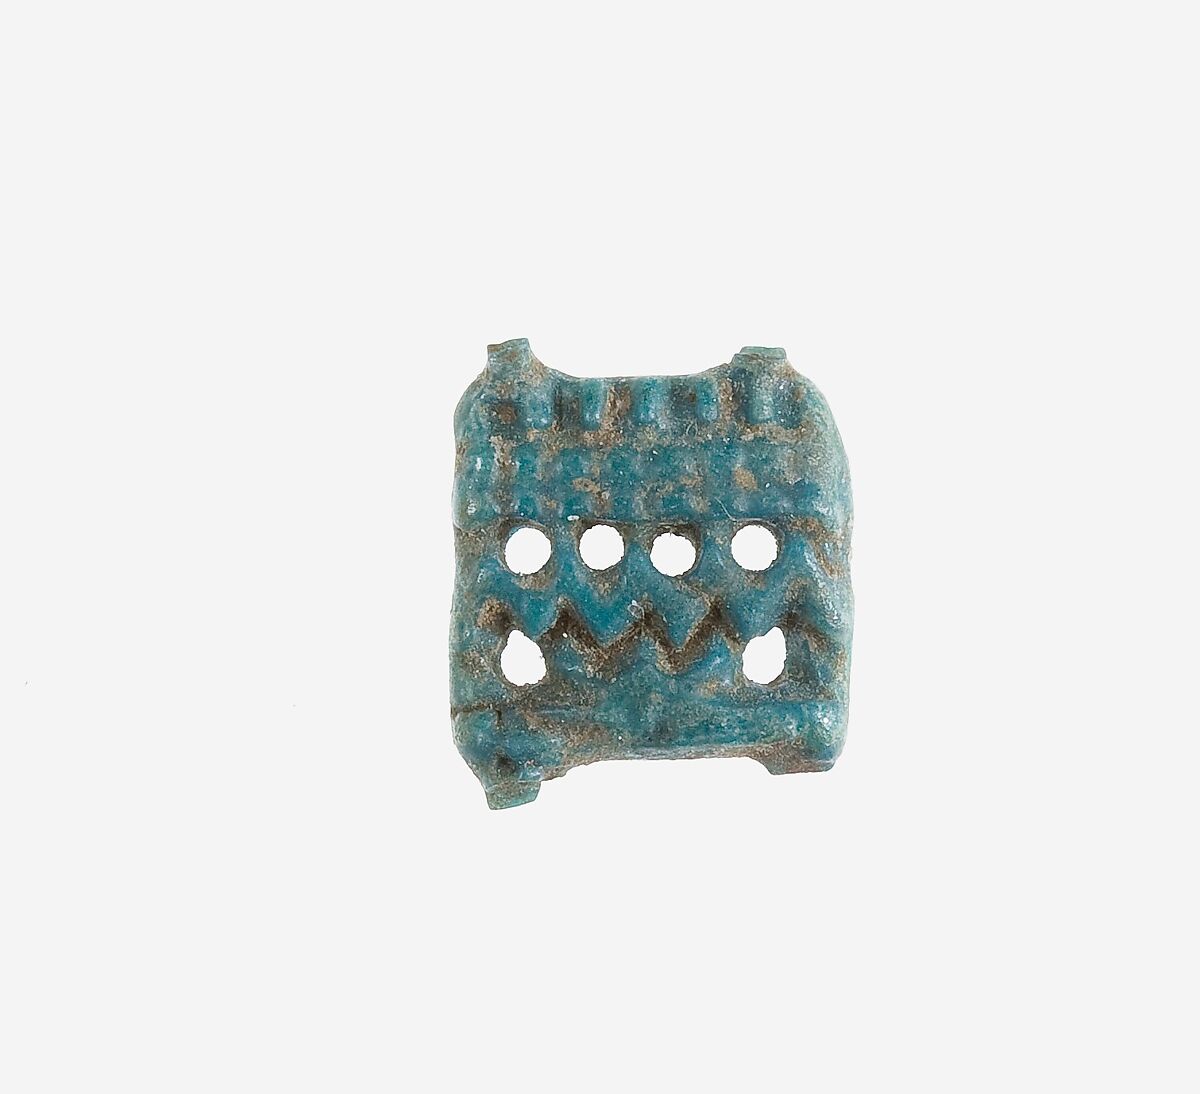 Amulet of the Word "Establish", Faience 